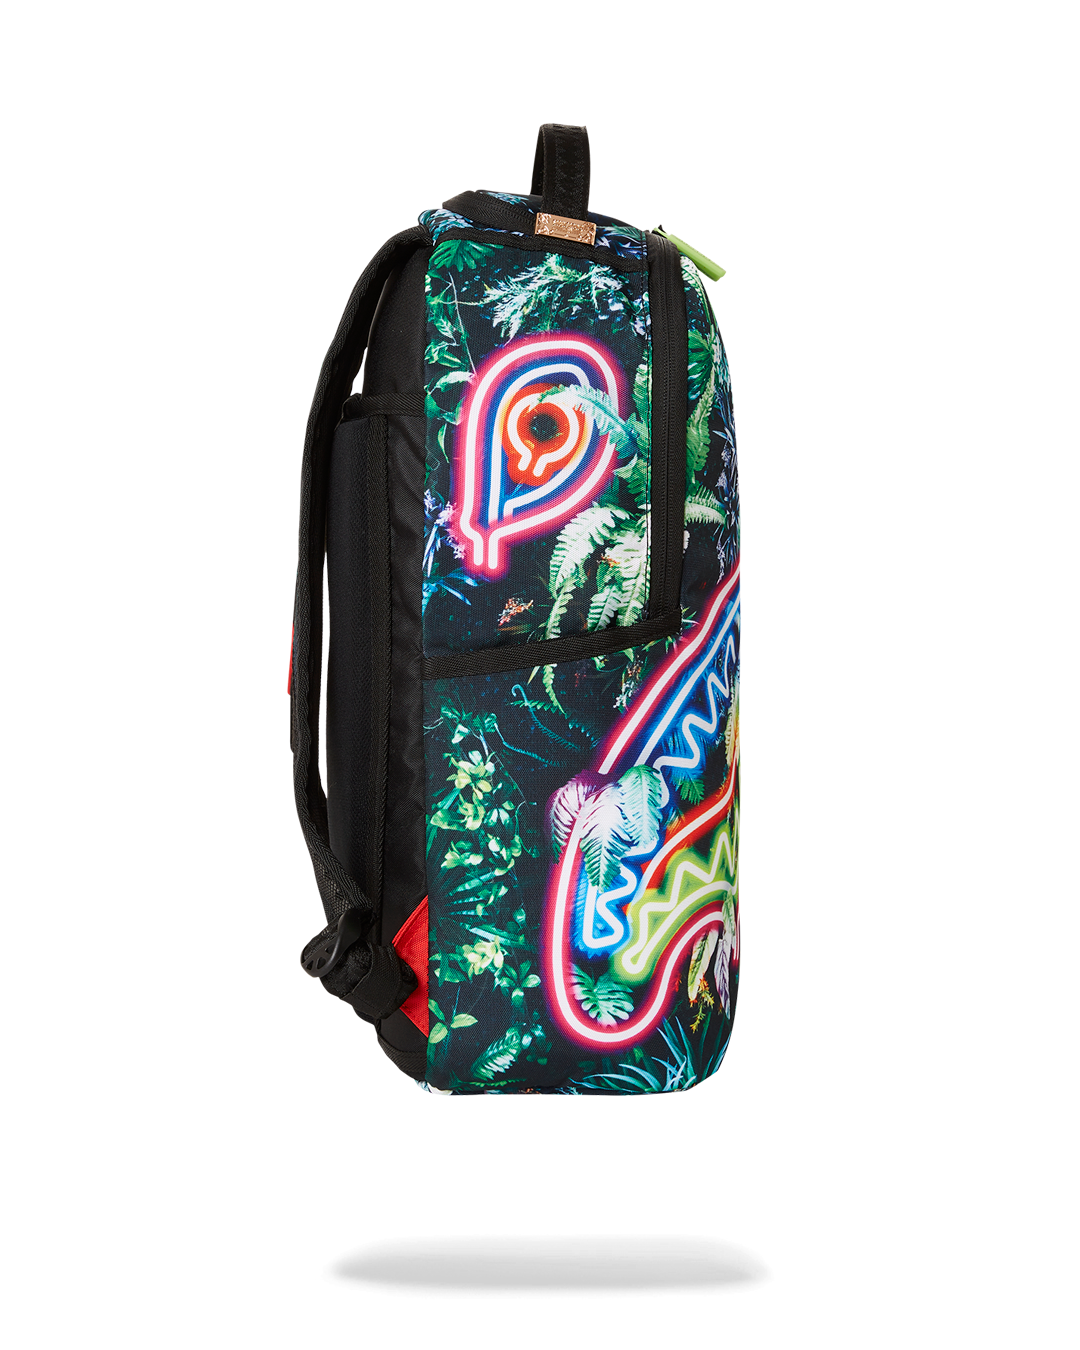 SPRAYGROUND: backpack in vegan leather with glitter shark mouth